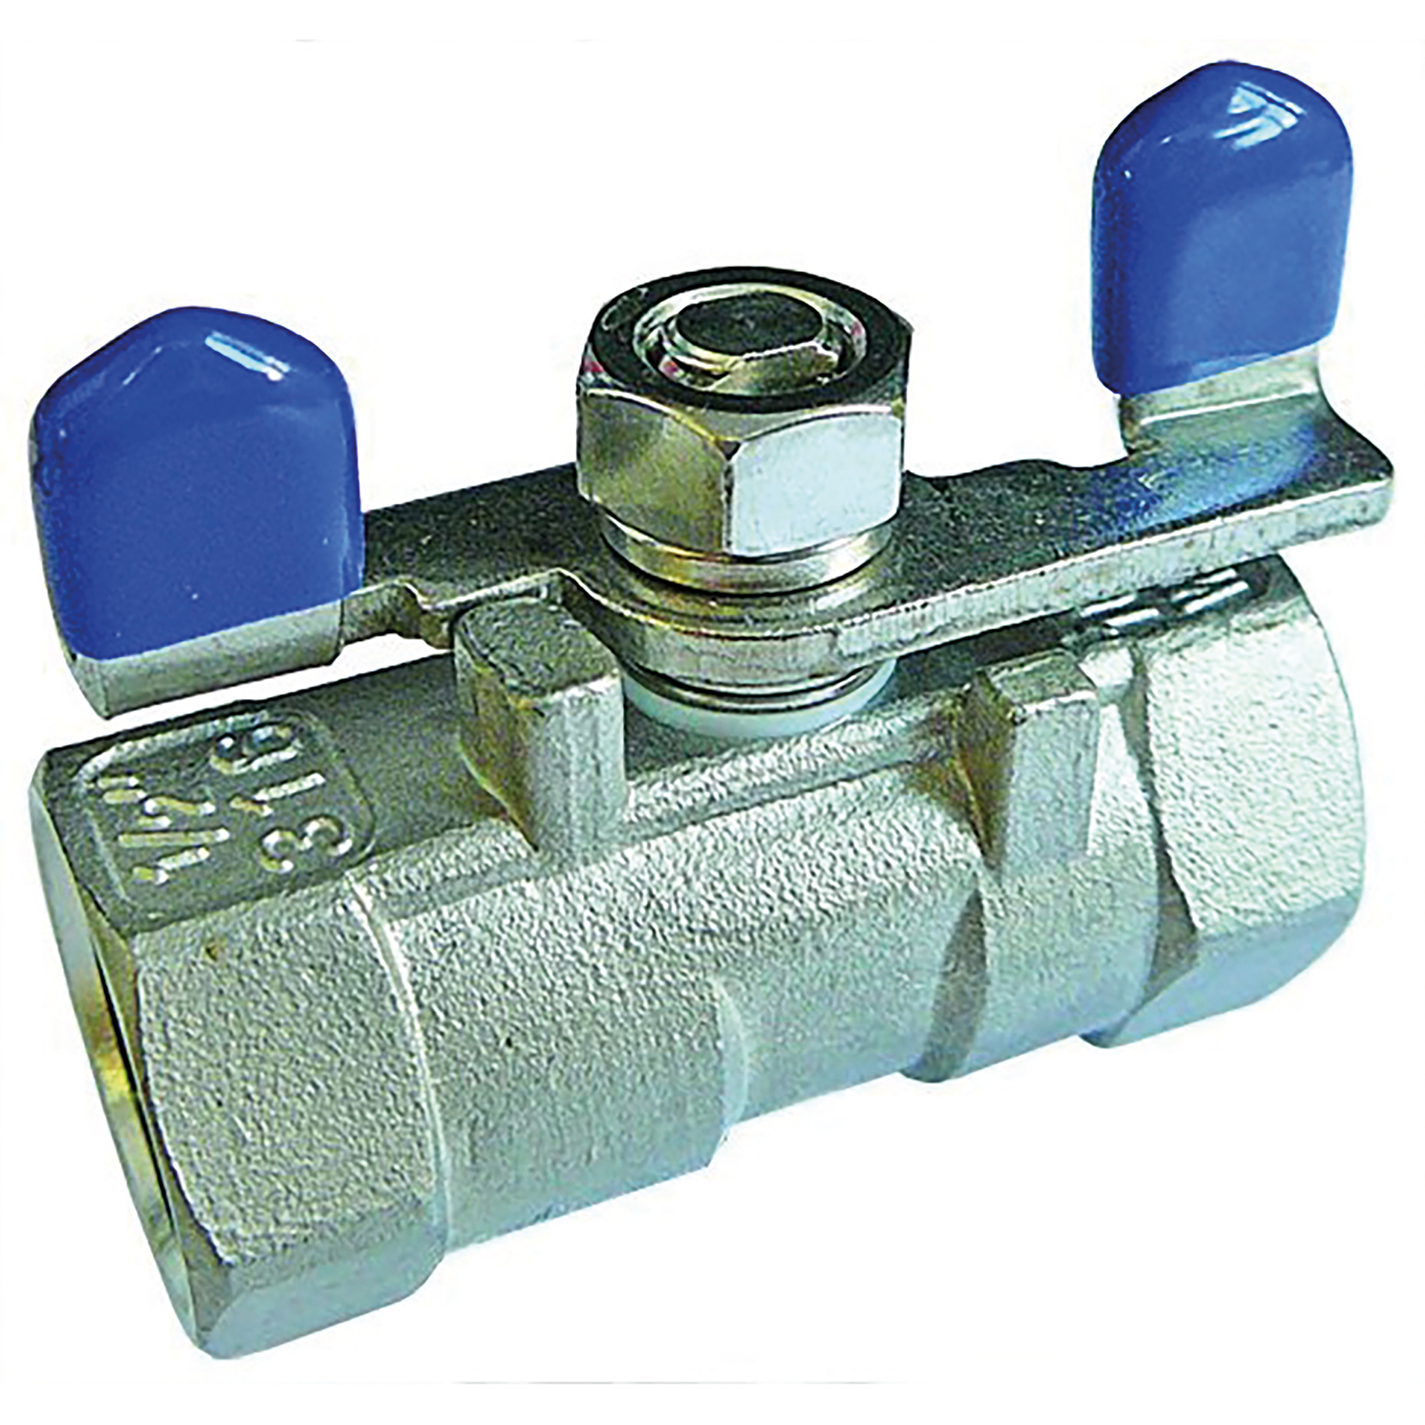 1/2" BSPP Female One Piece Butterfly Ball Valve